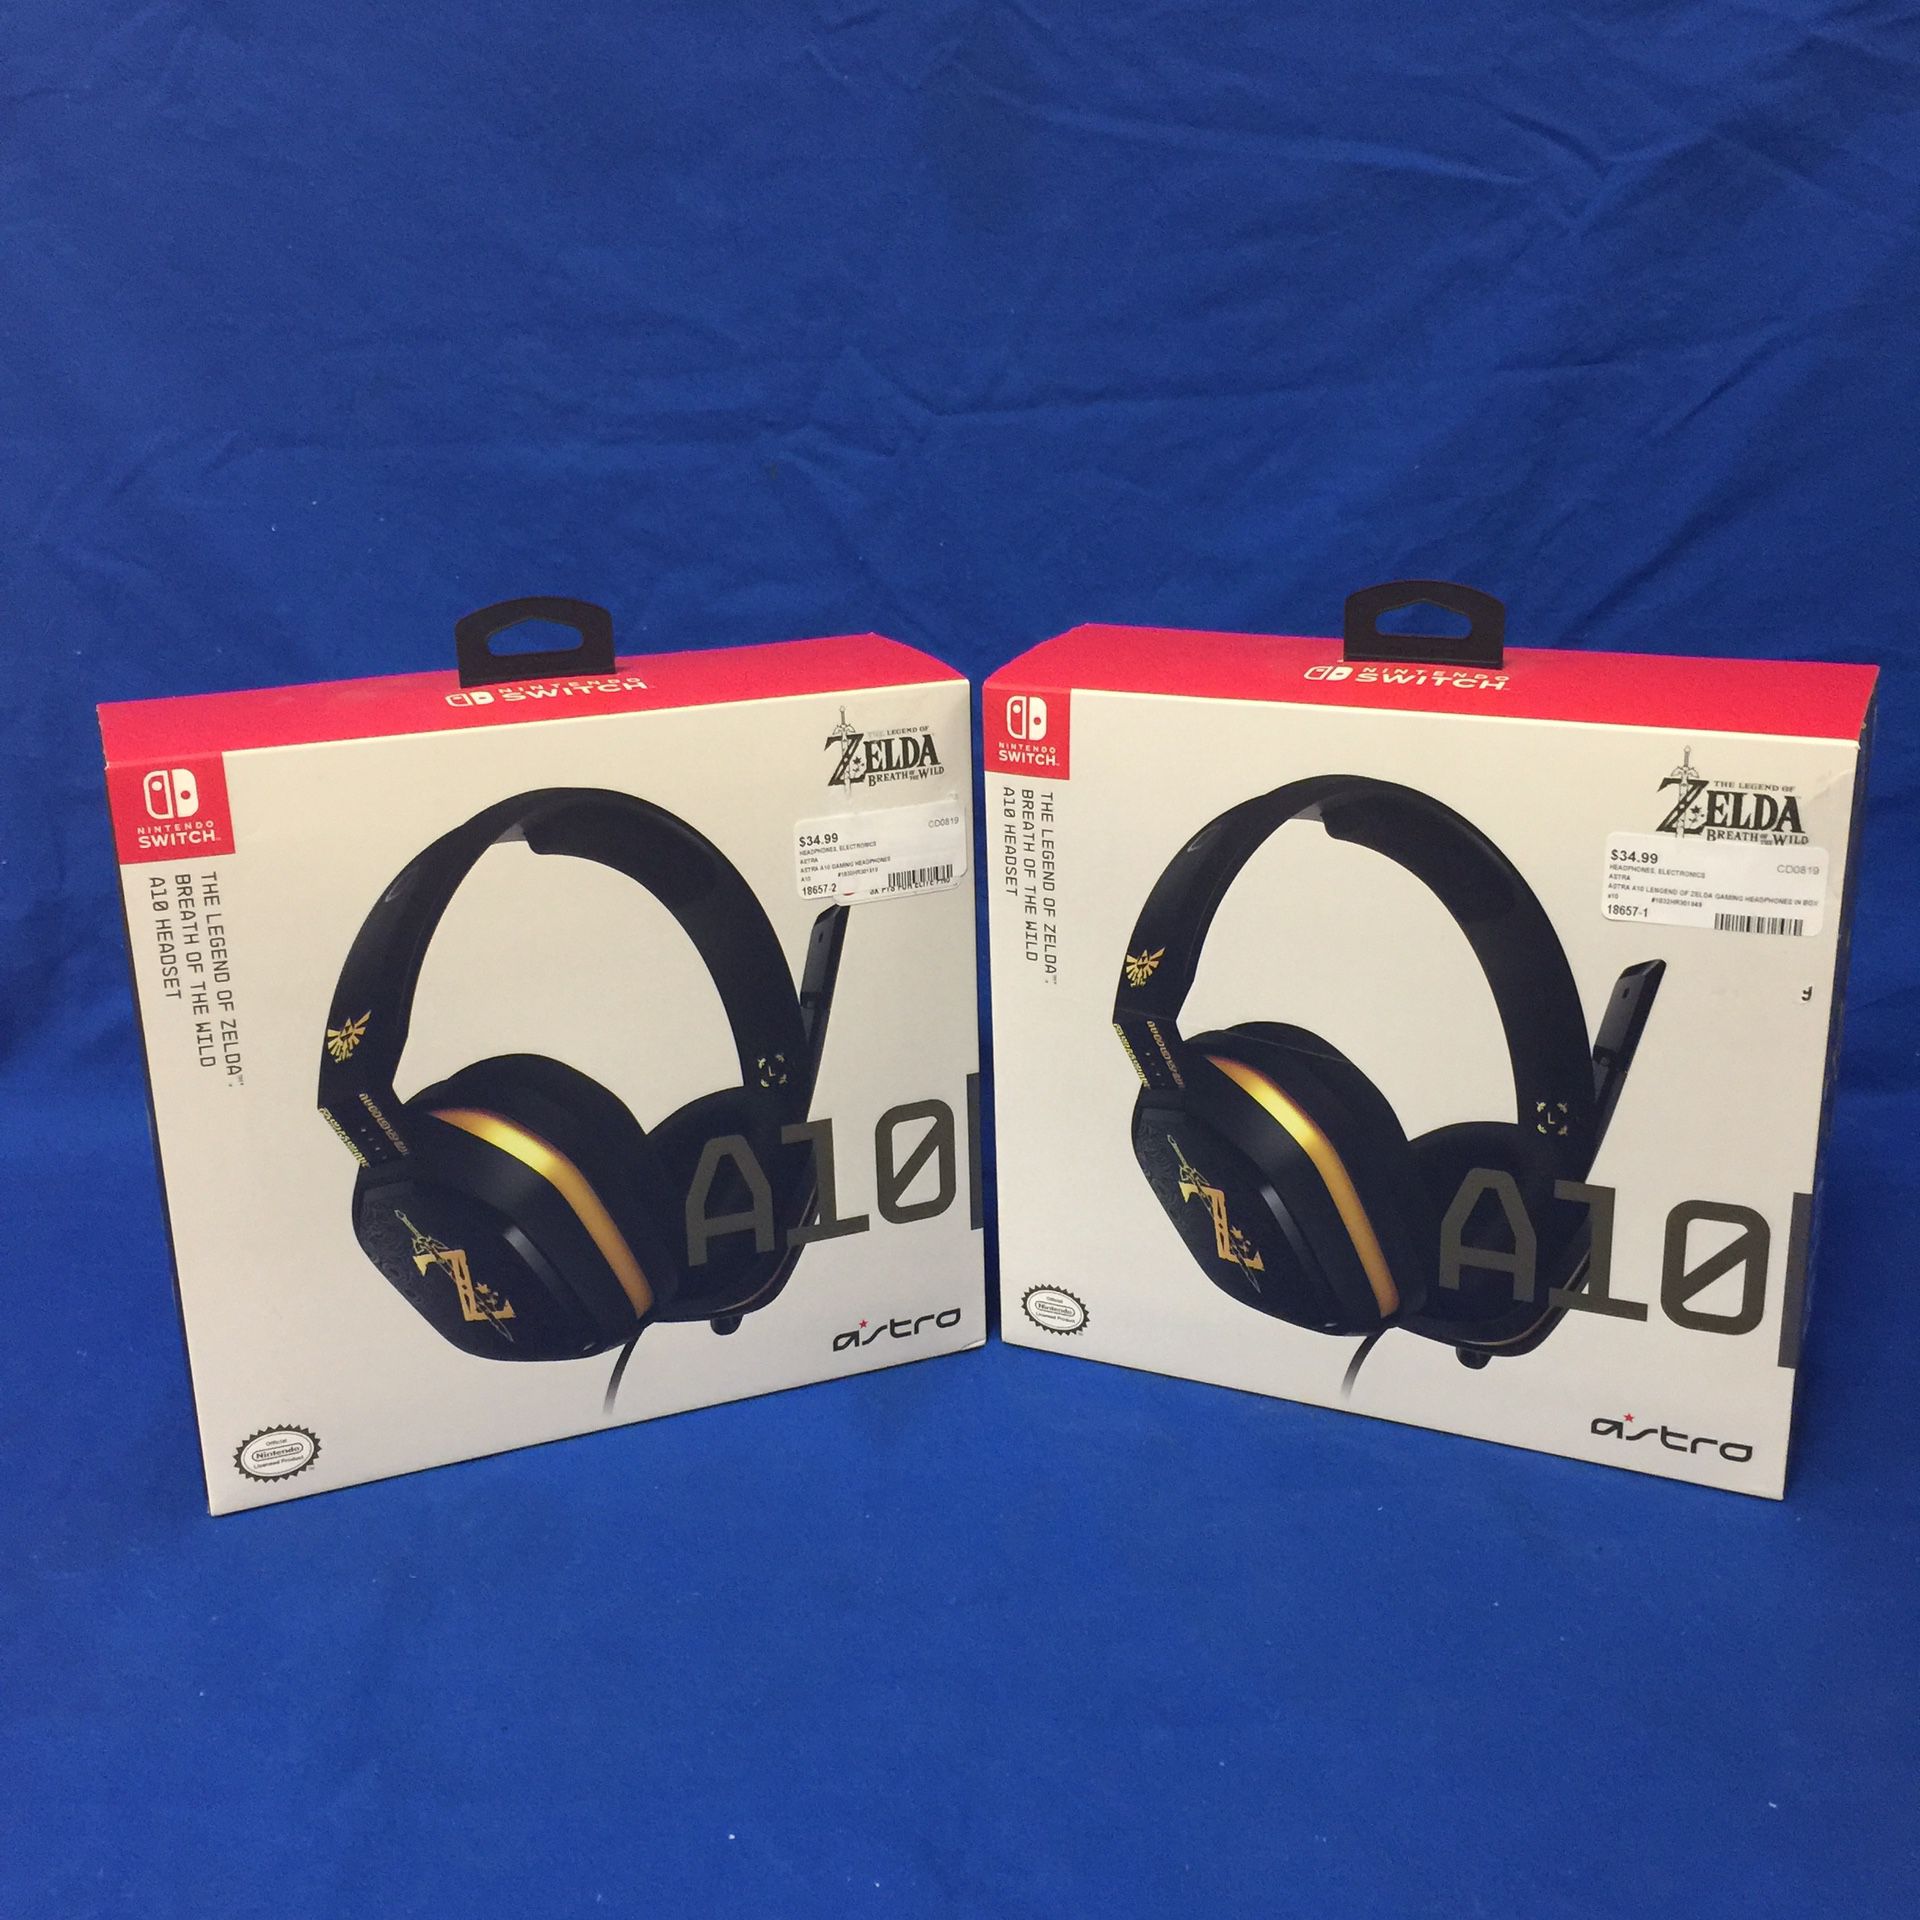 Astro The Legend of Zelda: Breath of the Wild Edition Wired Gaming Headphones for Nintendo Switch | PRICE IS FOR 1 (Model: A10)